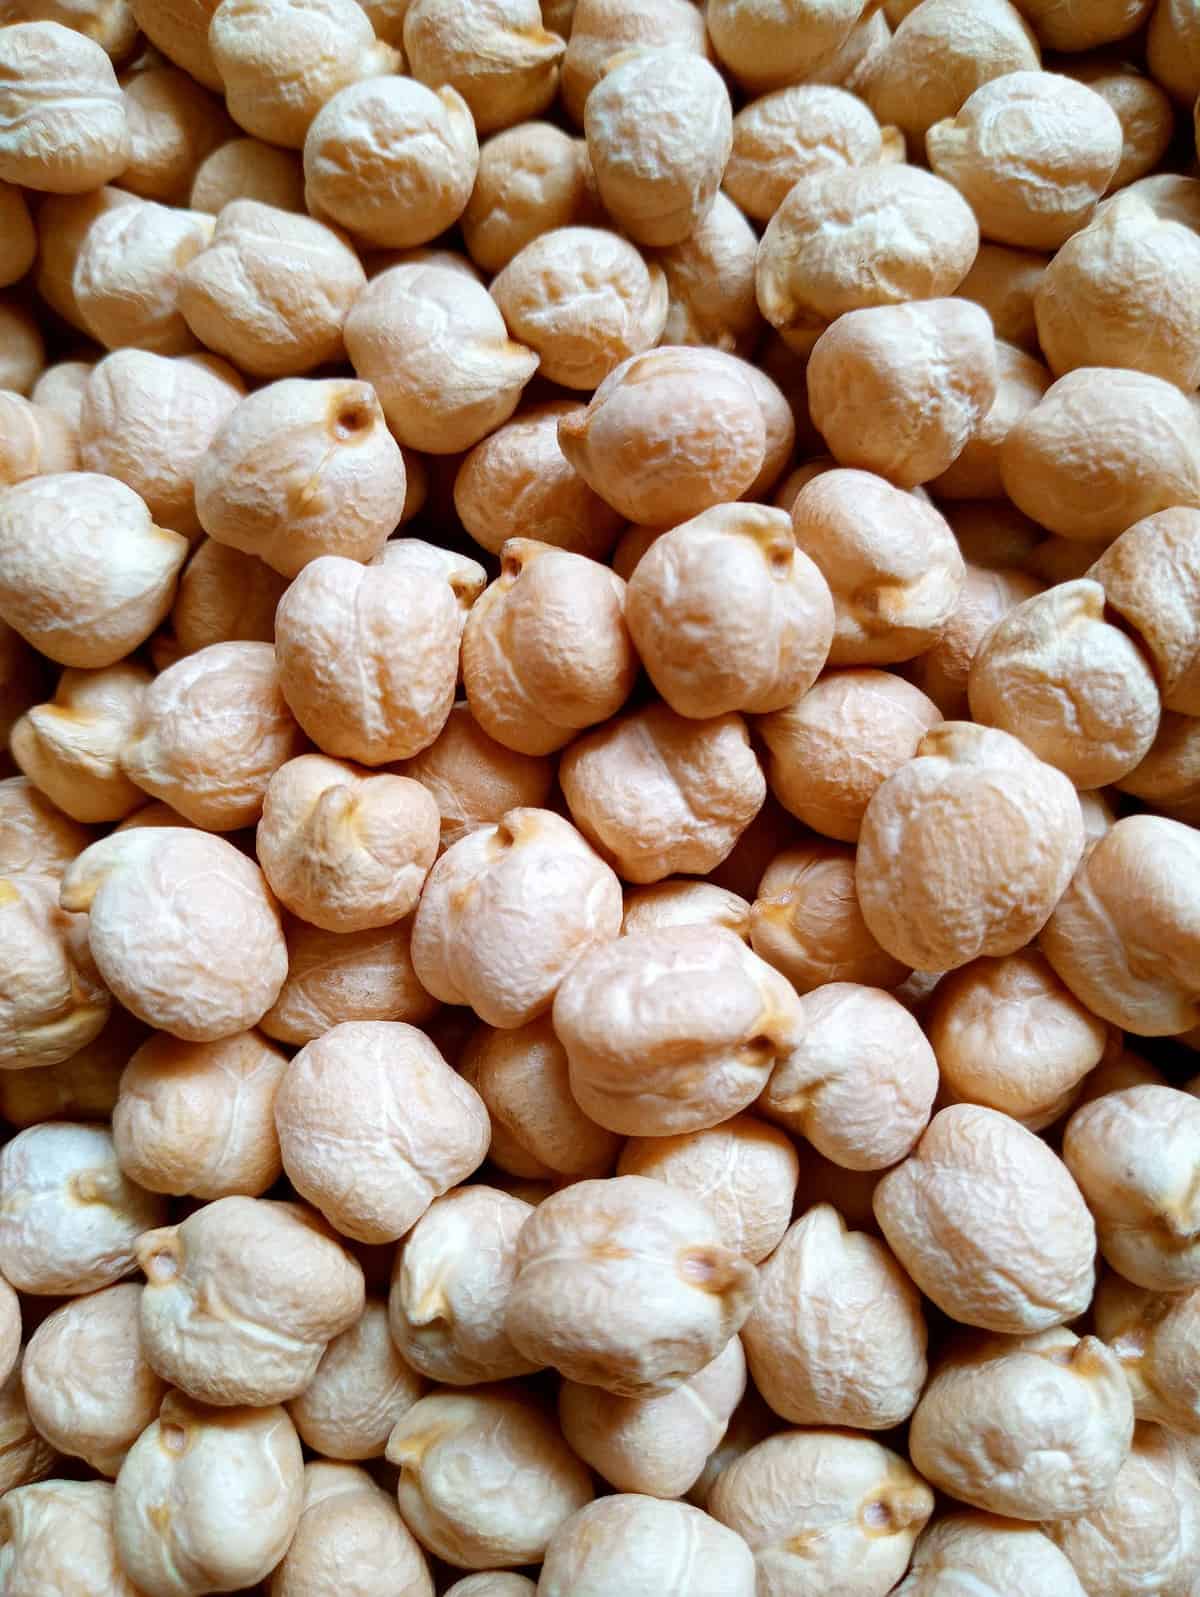 Are Chickpeas Worth the Hype? Here’s Why I Say Yes!